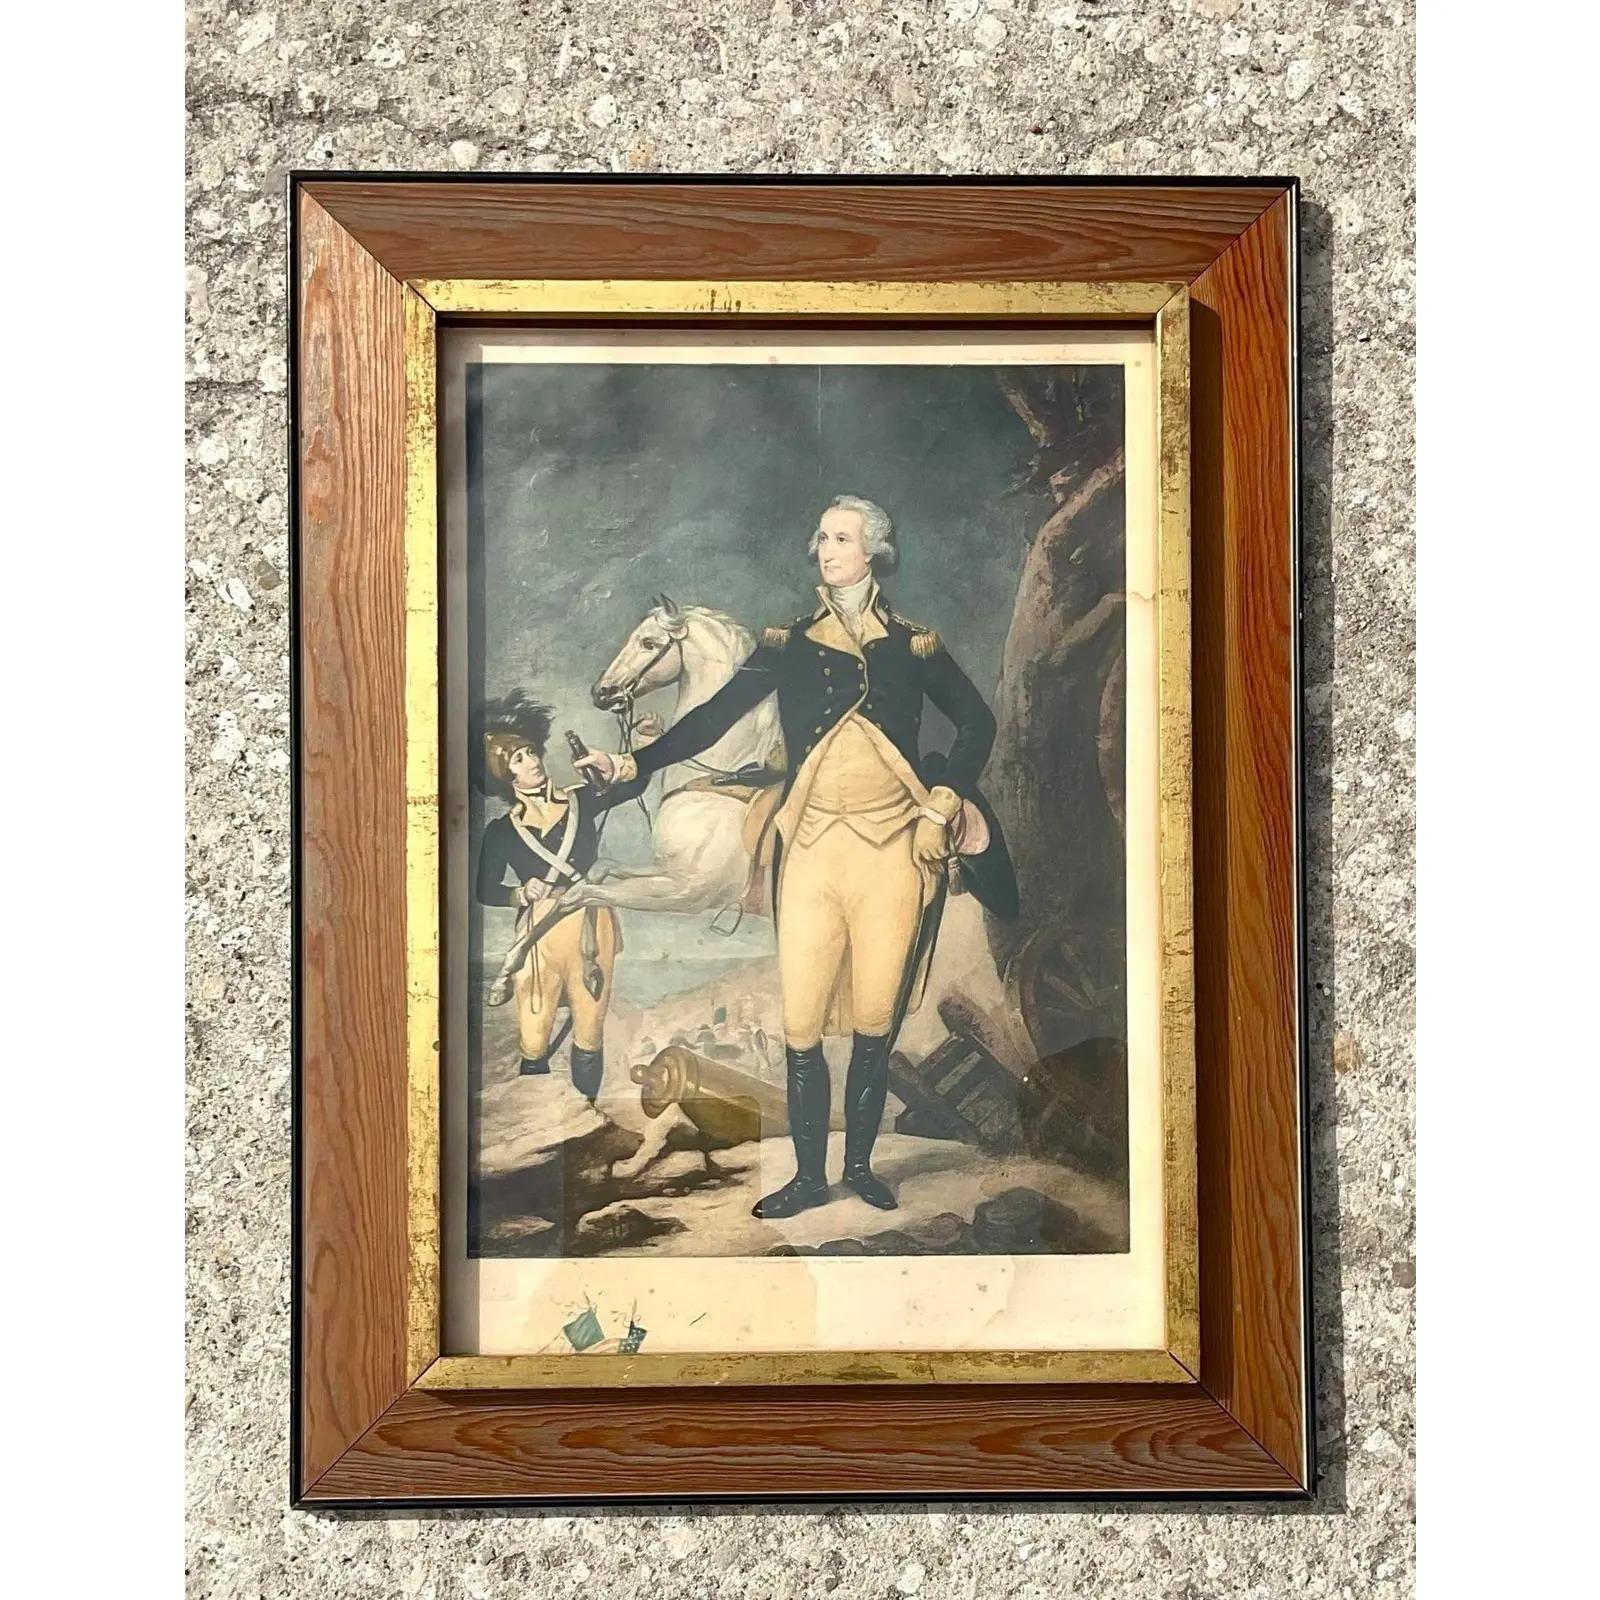 A vintage print of the painting George Washington before the Battle of Trenton from 1792-94. Beautiful gilt tipped frame. Acquired at a Palm Beach estate.